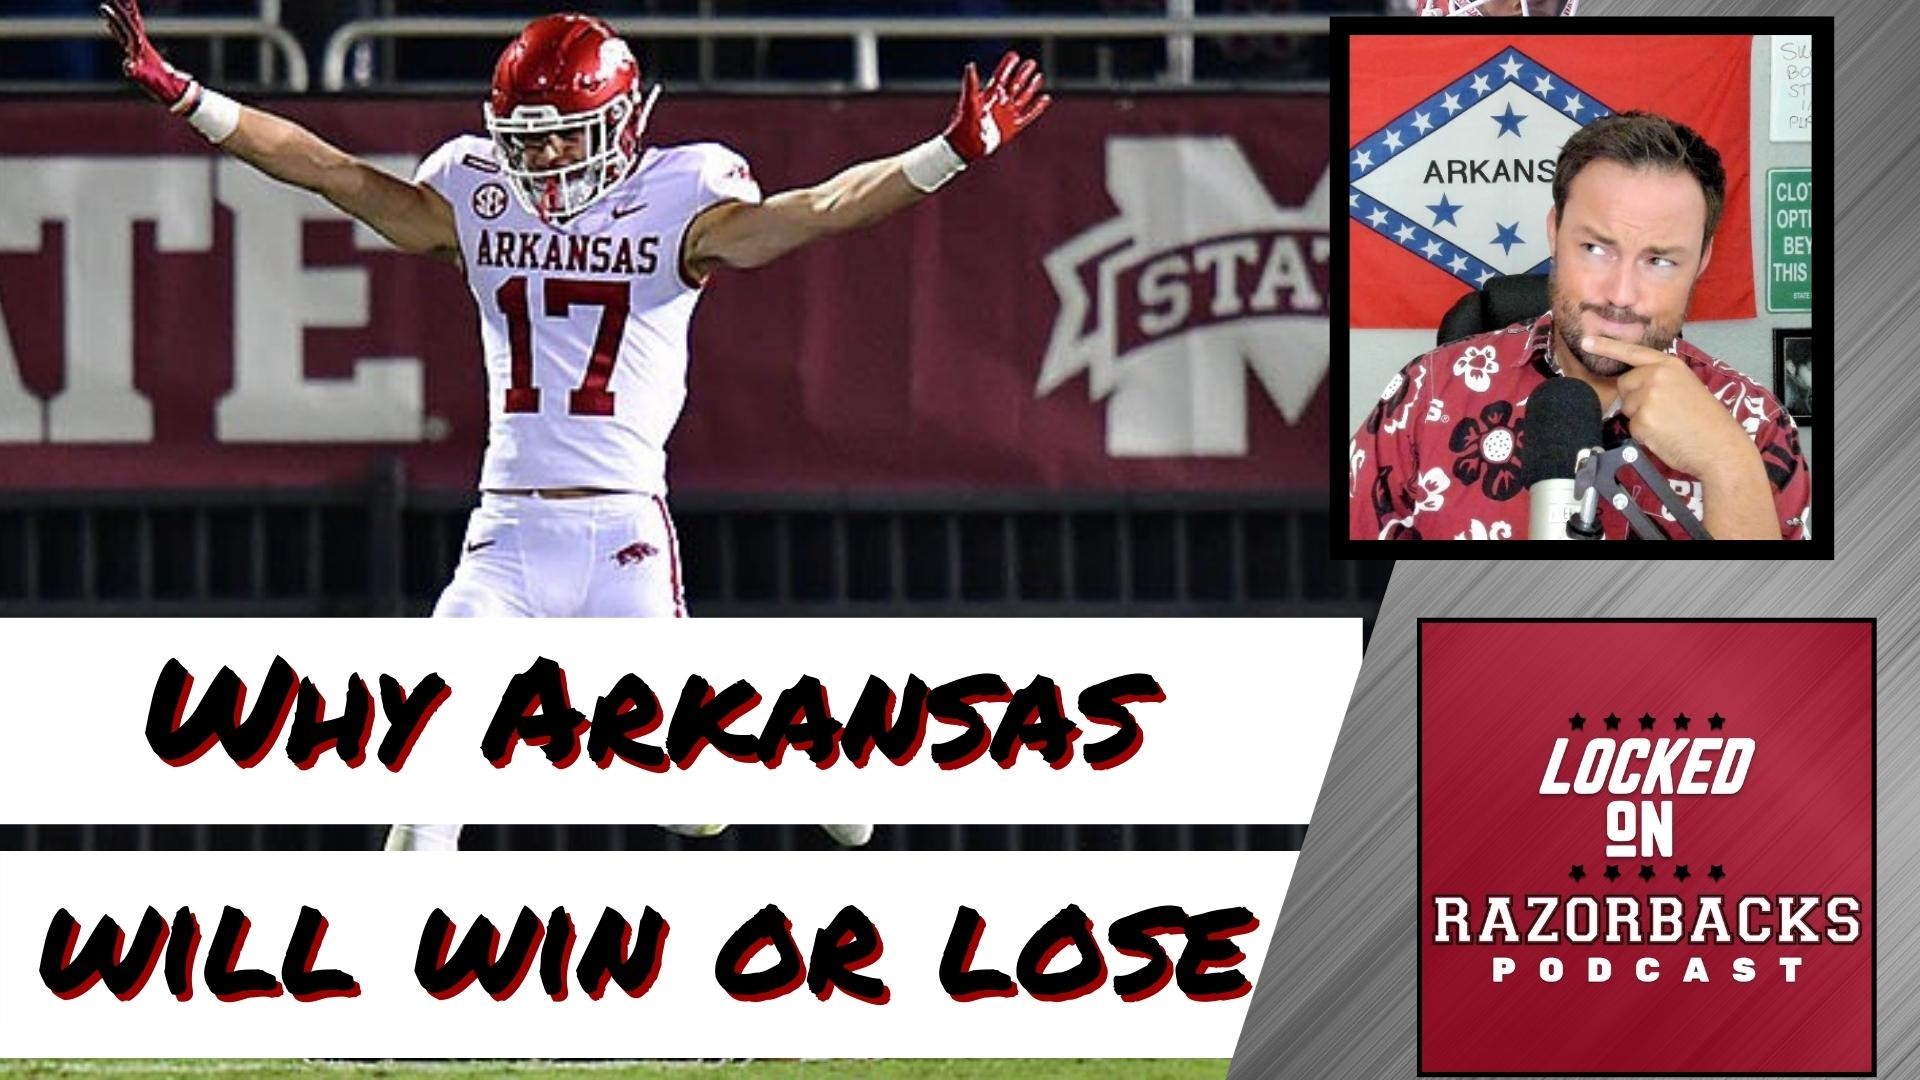 John Nabors discusses the various reasons as to why the Razorbacks could easily beat the Bulldogs but how they also could very easily lose.